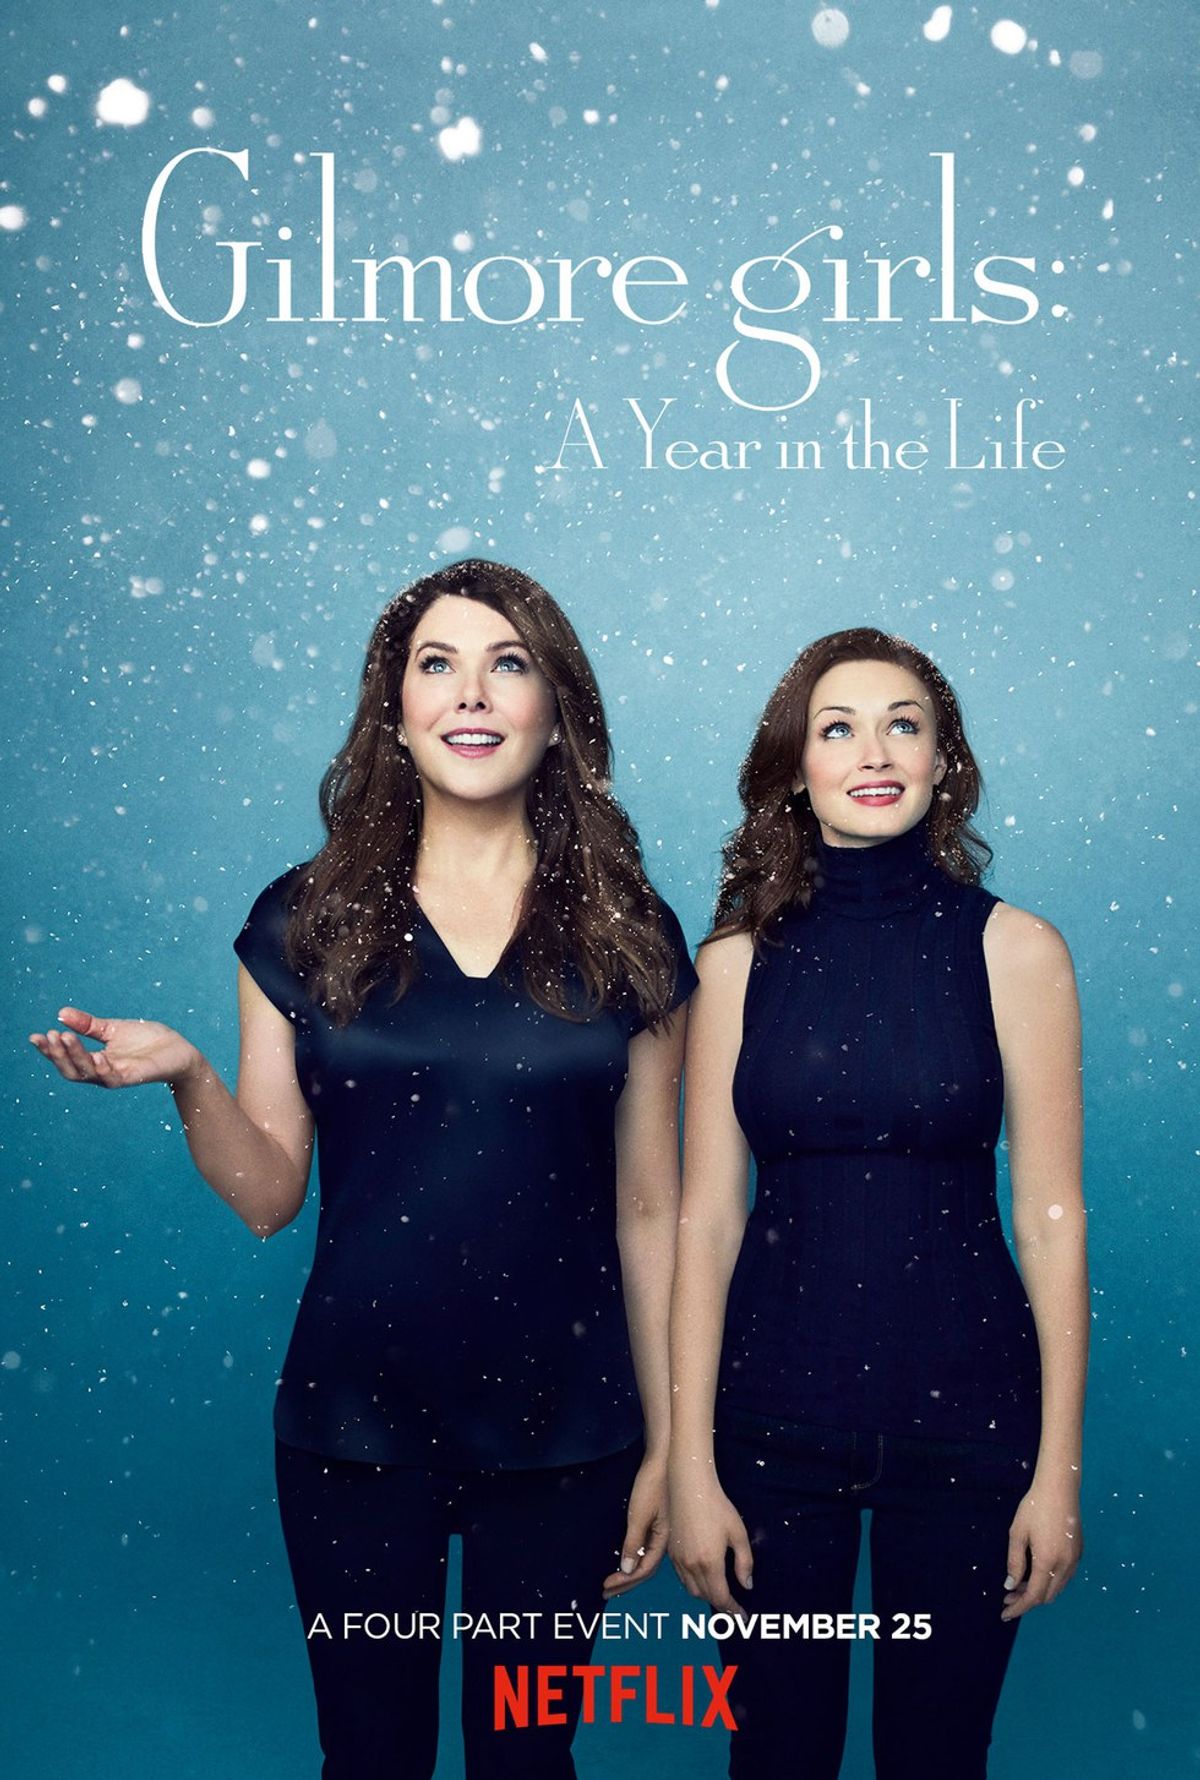 10 Things I'm Excited About In The Gilmore Girls Revival